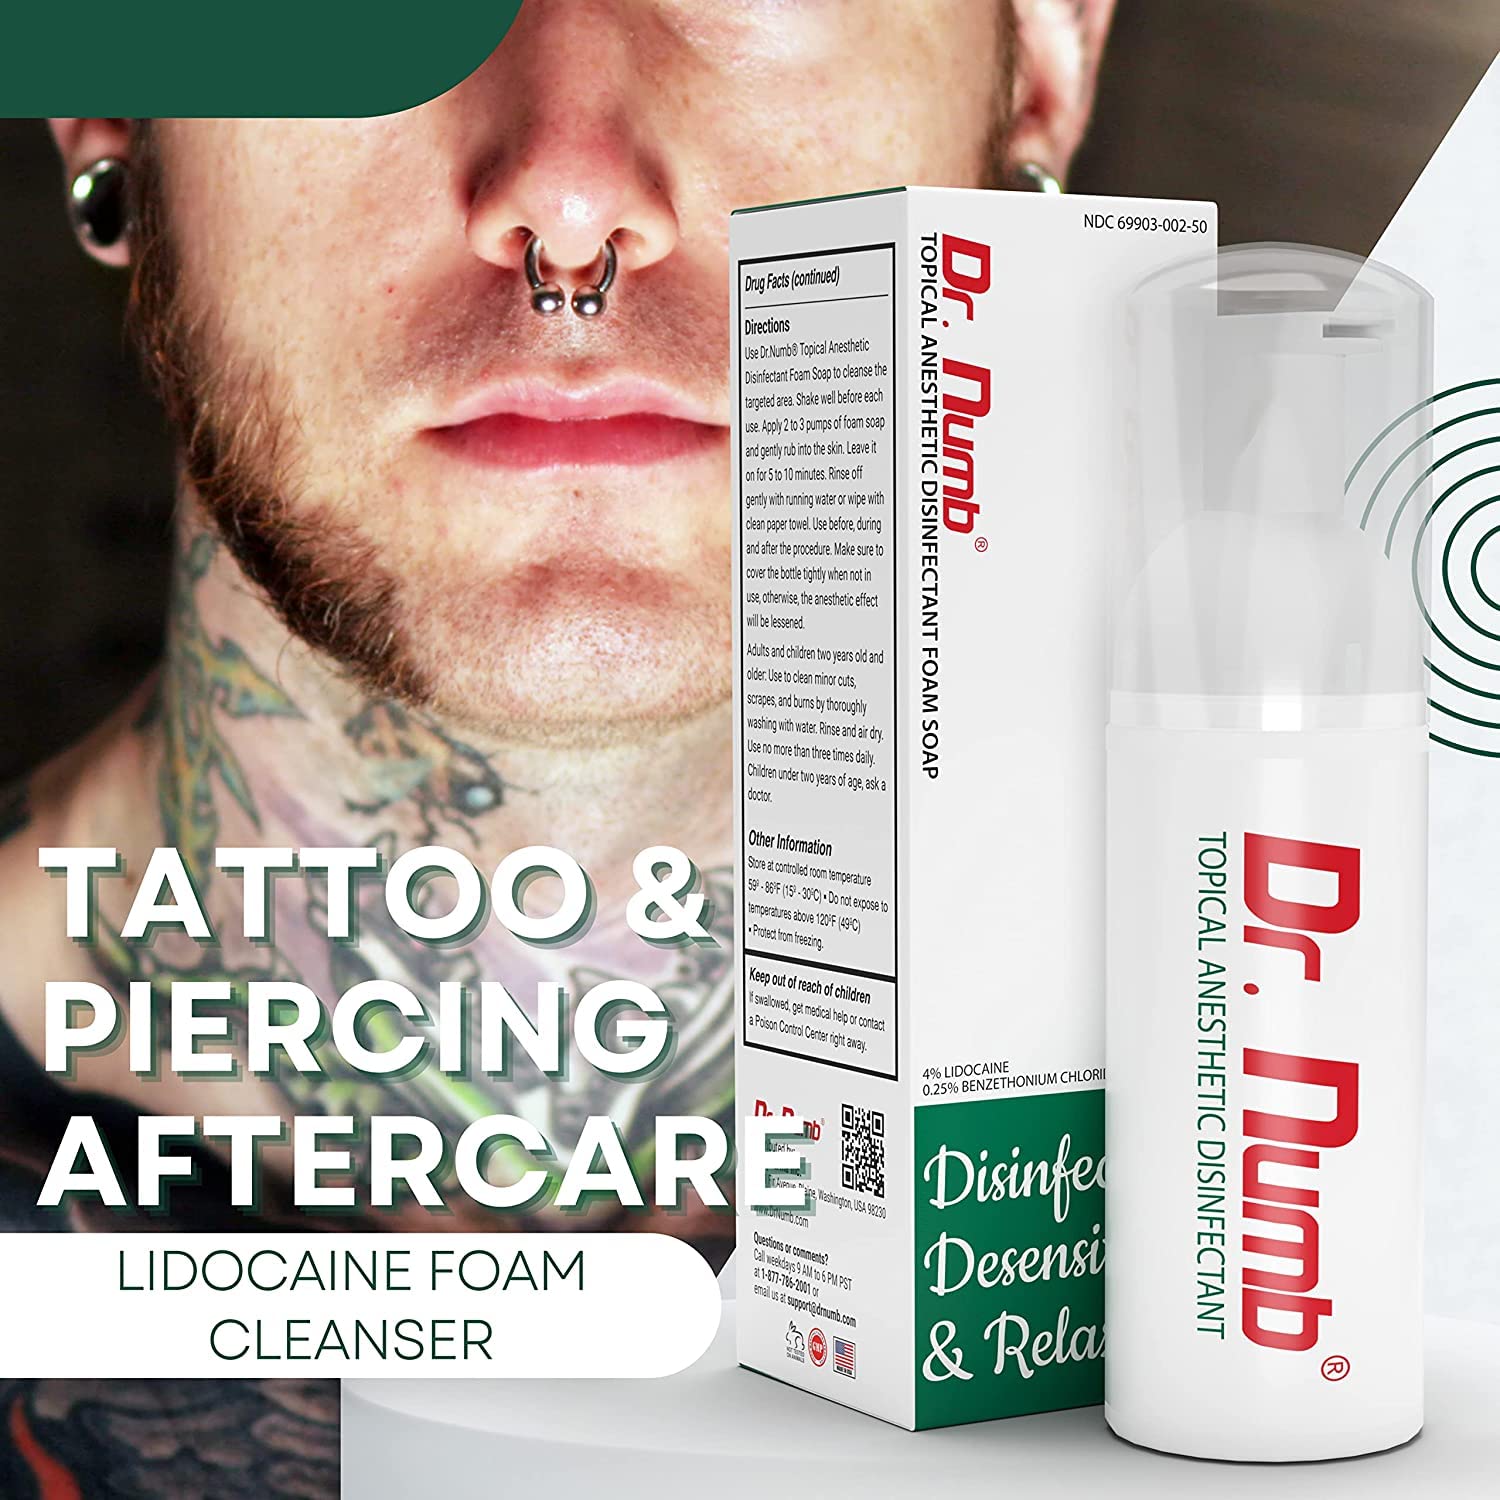 Foam soap for piercing aftercare